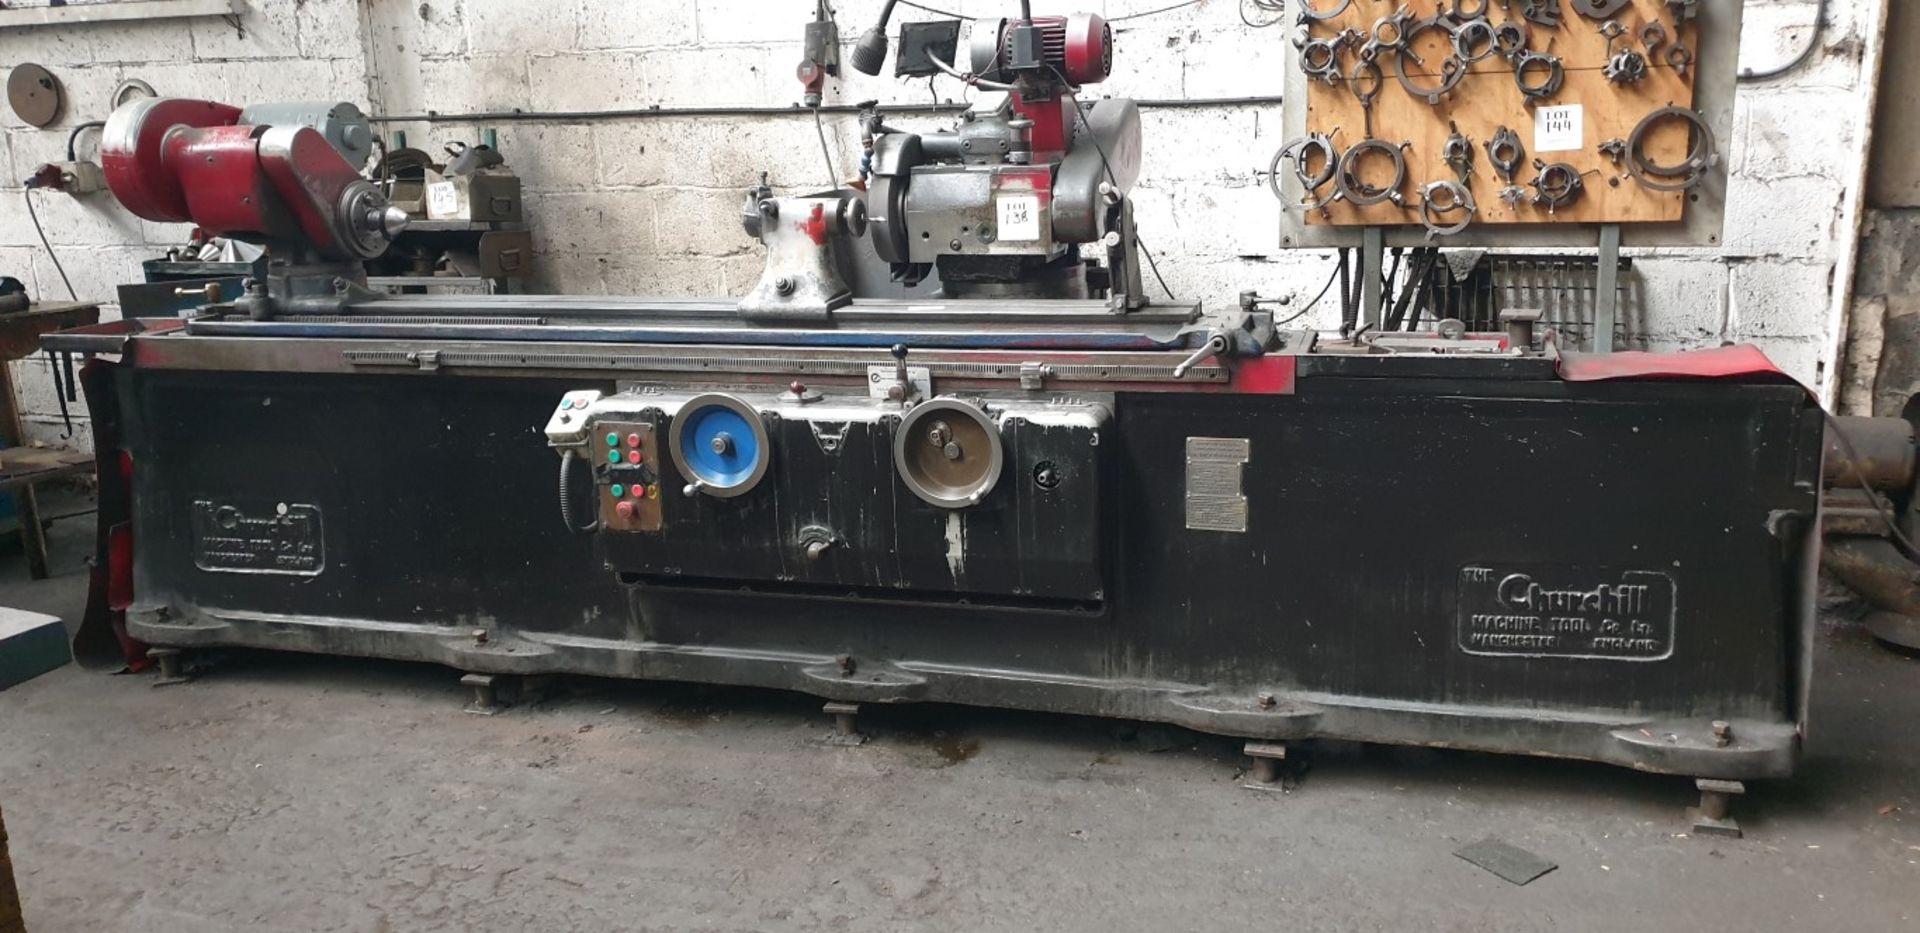 Churchill PBW universal grinder; 16" swing x 72" centres and pallet of spares (Method statement